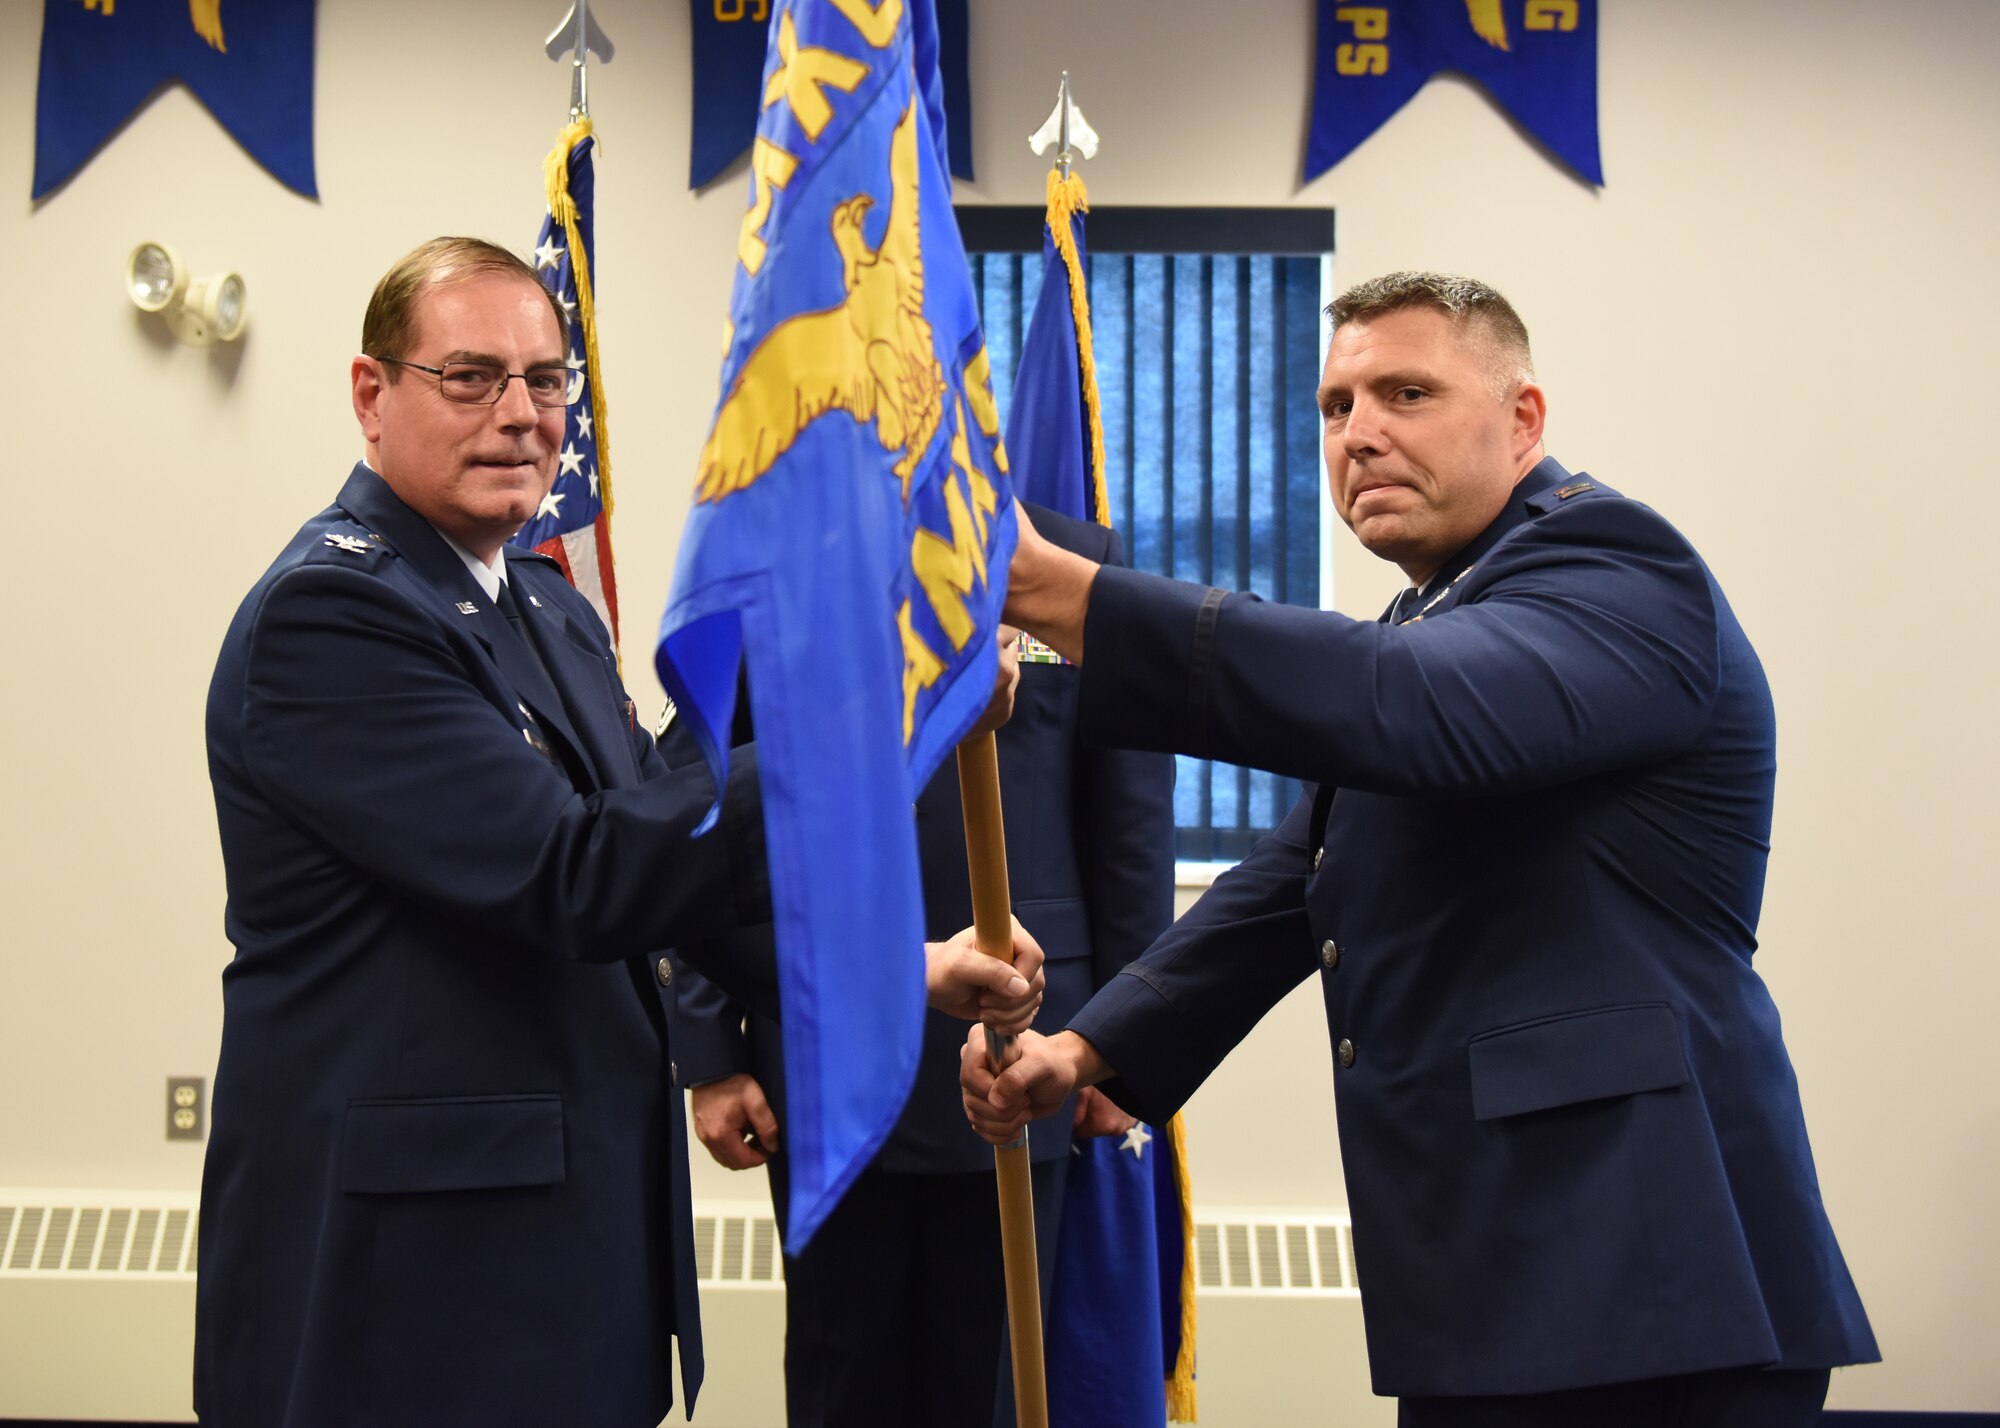 Capt. Joseph E. Walters, commander of the 911th Aircraft Maintenance Squadron, and Col. Clifford Waller, commander of the 911th Maintenance Group, pose for a photo with the squadron flag during an assumption of command ceremony at the Pittsburgh International Airport Air Reserve Station, Pennsylvania Aug. 3, 2019.